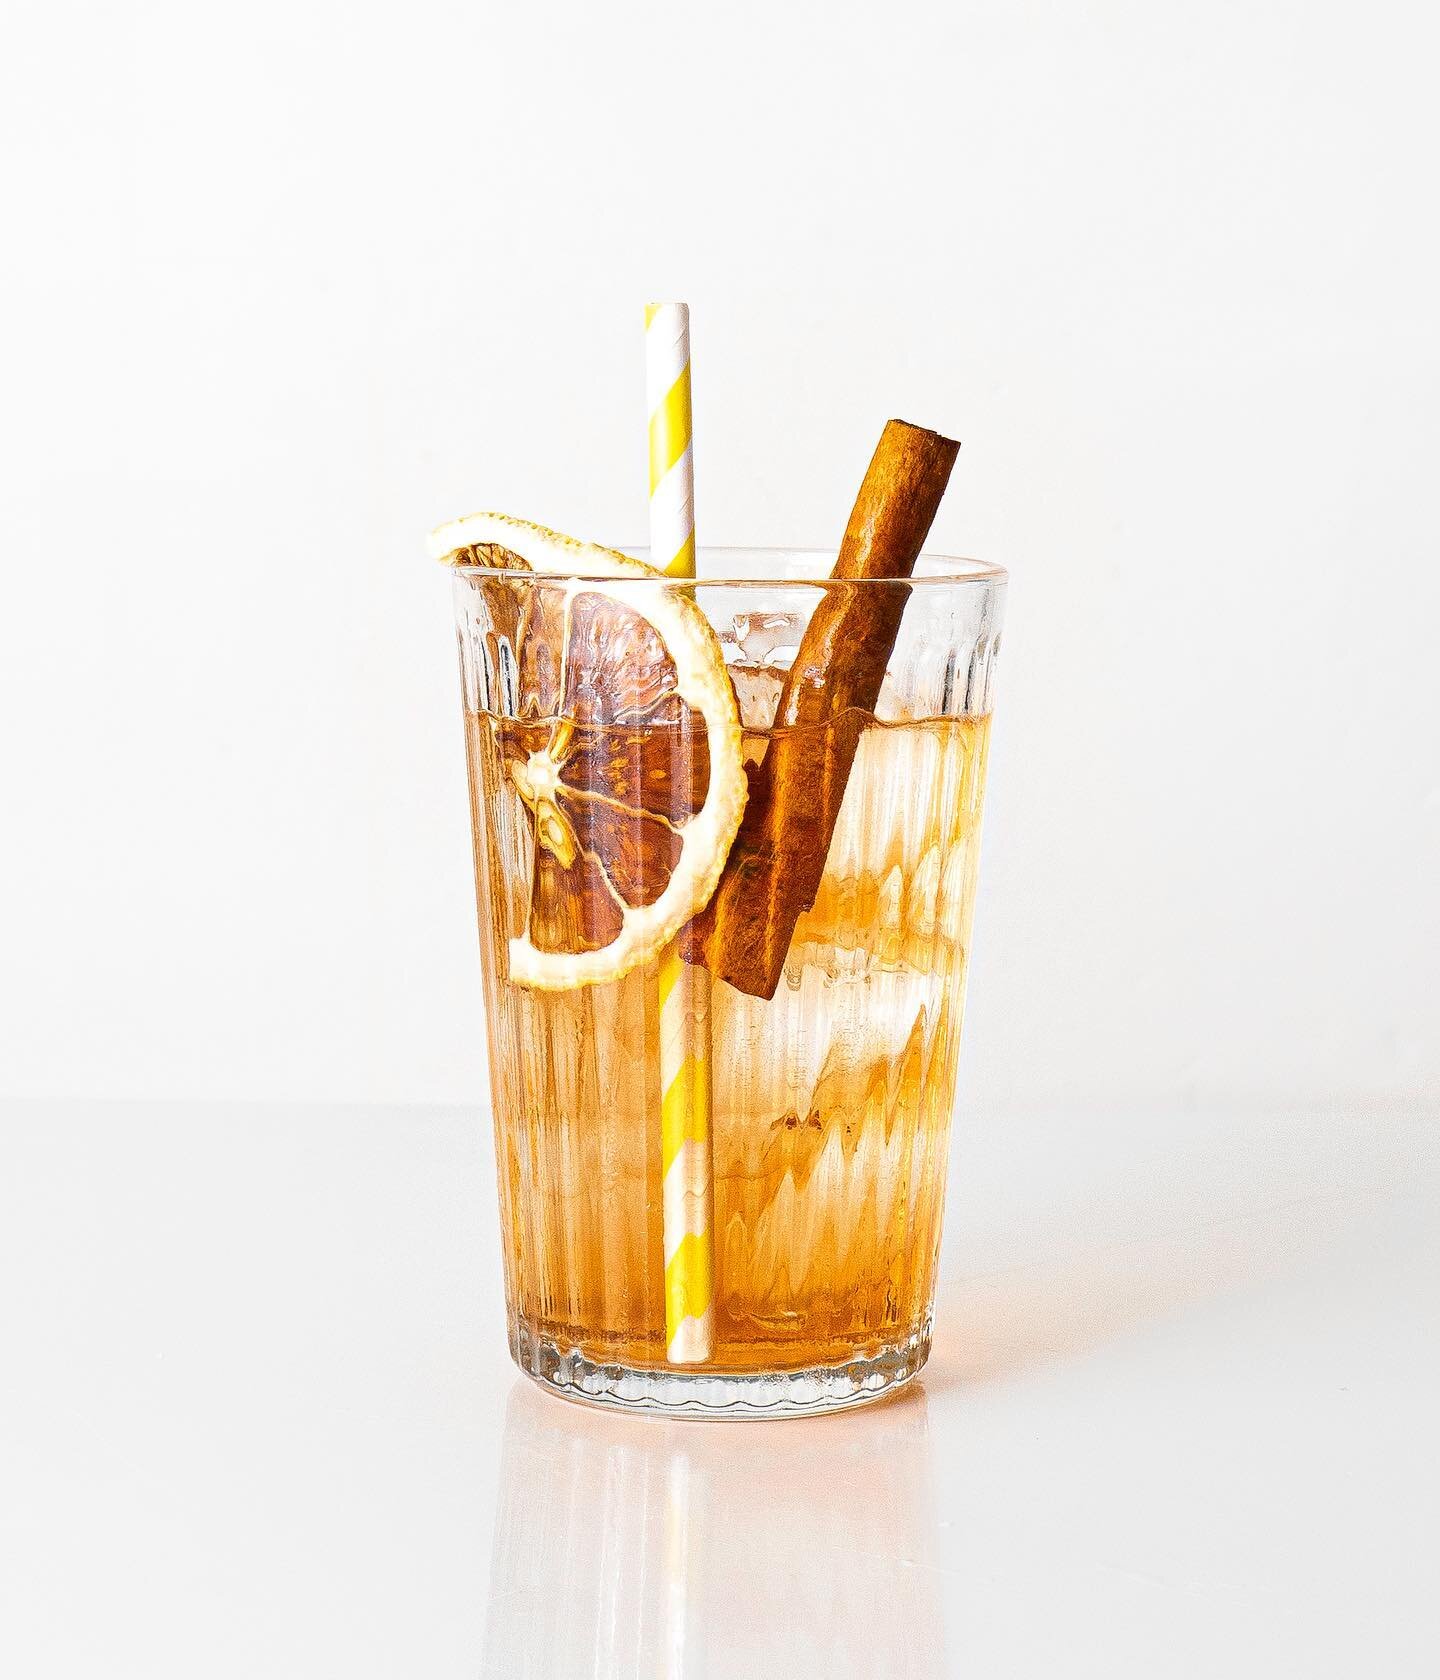 PEACH &amp; BITTERS
-
50ml DISPENSE Amaro
100ml London Essence Peach &amp; Jasmine Soda
Ultra simple, really refreshing and full of flavour with a delicate bitter finish. 
-
.
.
.

#martini
#cocktailcatering
#ukcocktails
#mixologist
#amaro
#cocktailk